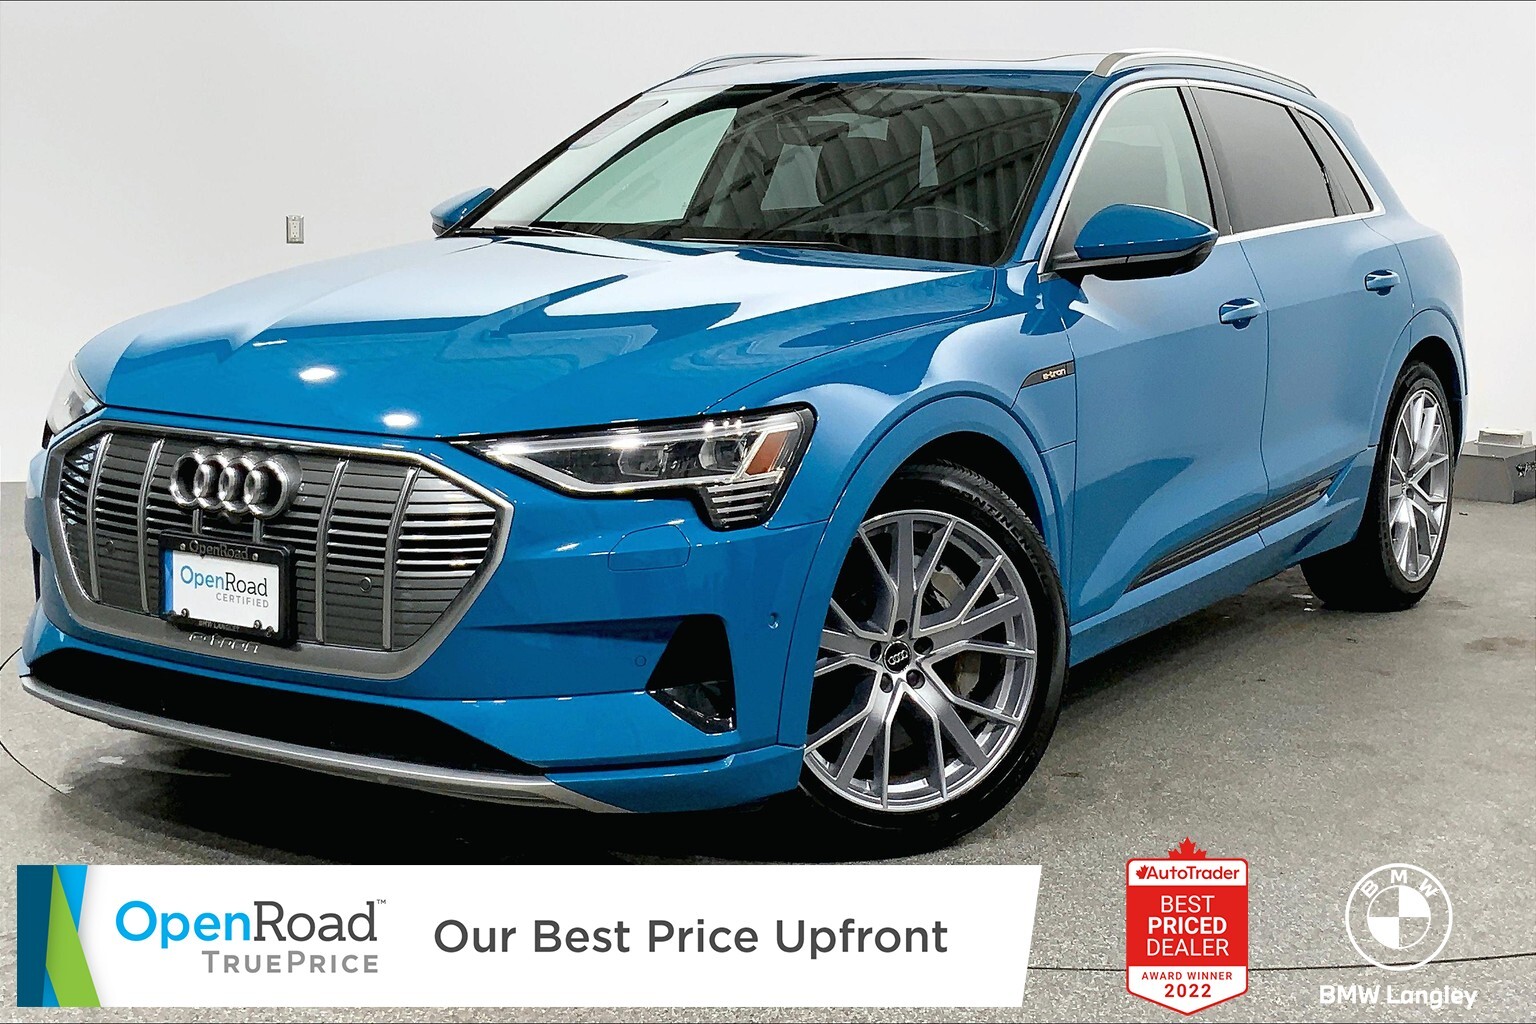 2019 Audi e-tron - Local, 1 Owner, Fully Serviced! 